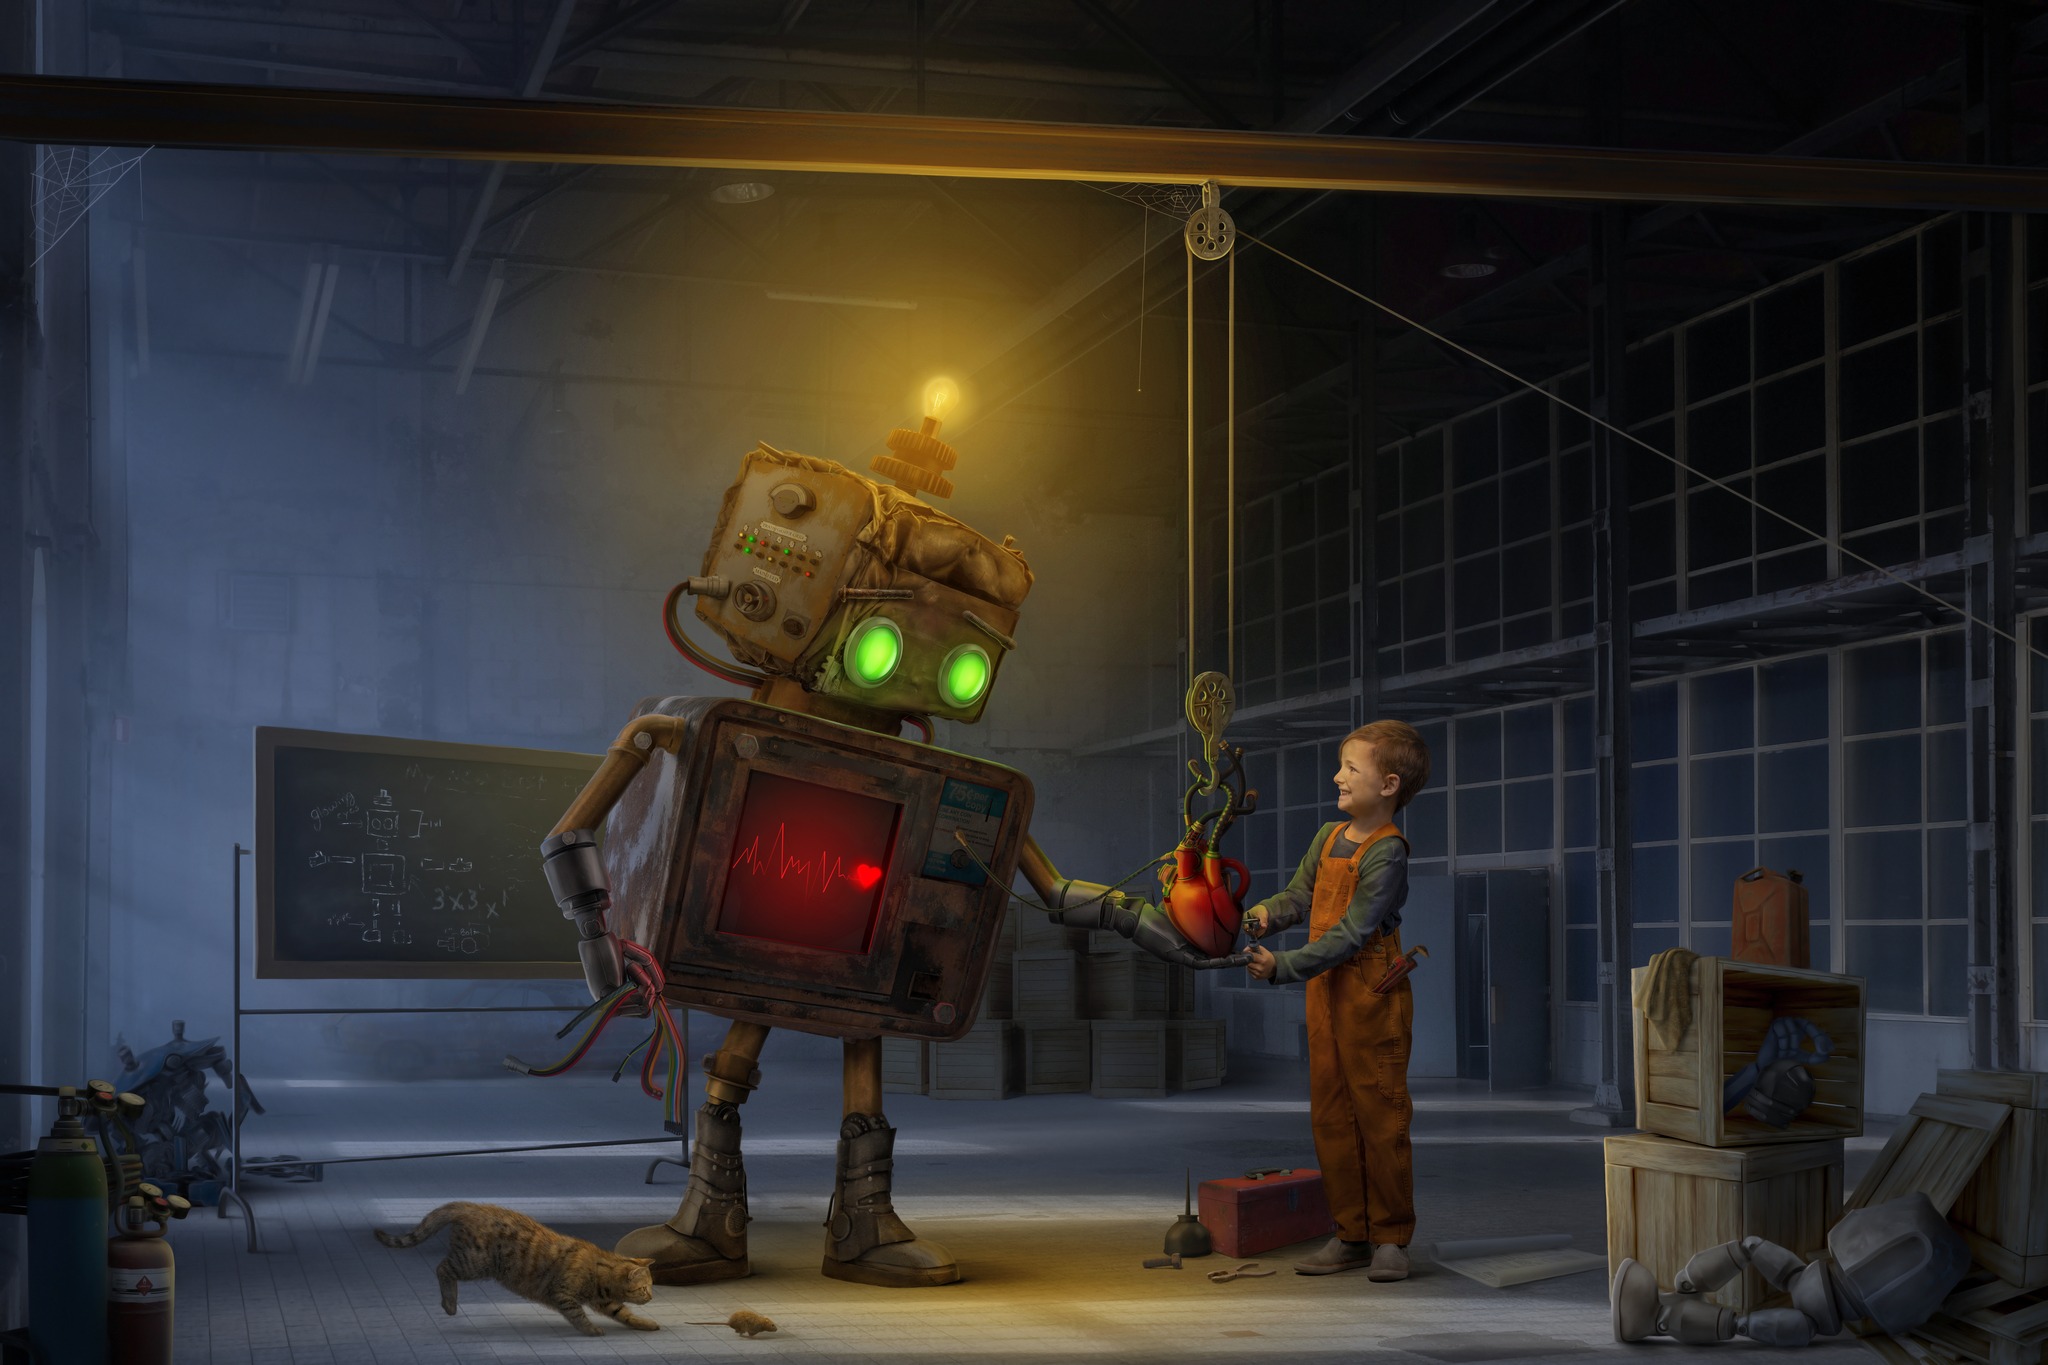 Boy with Robot photo composite, robot has glowing eyes, boy is building him a heart